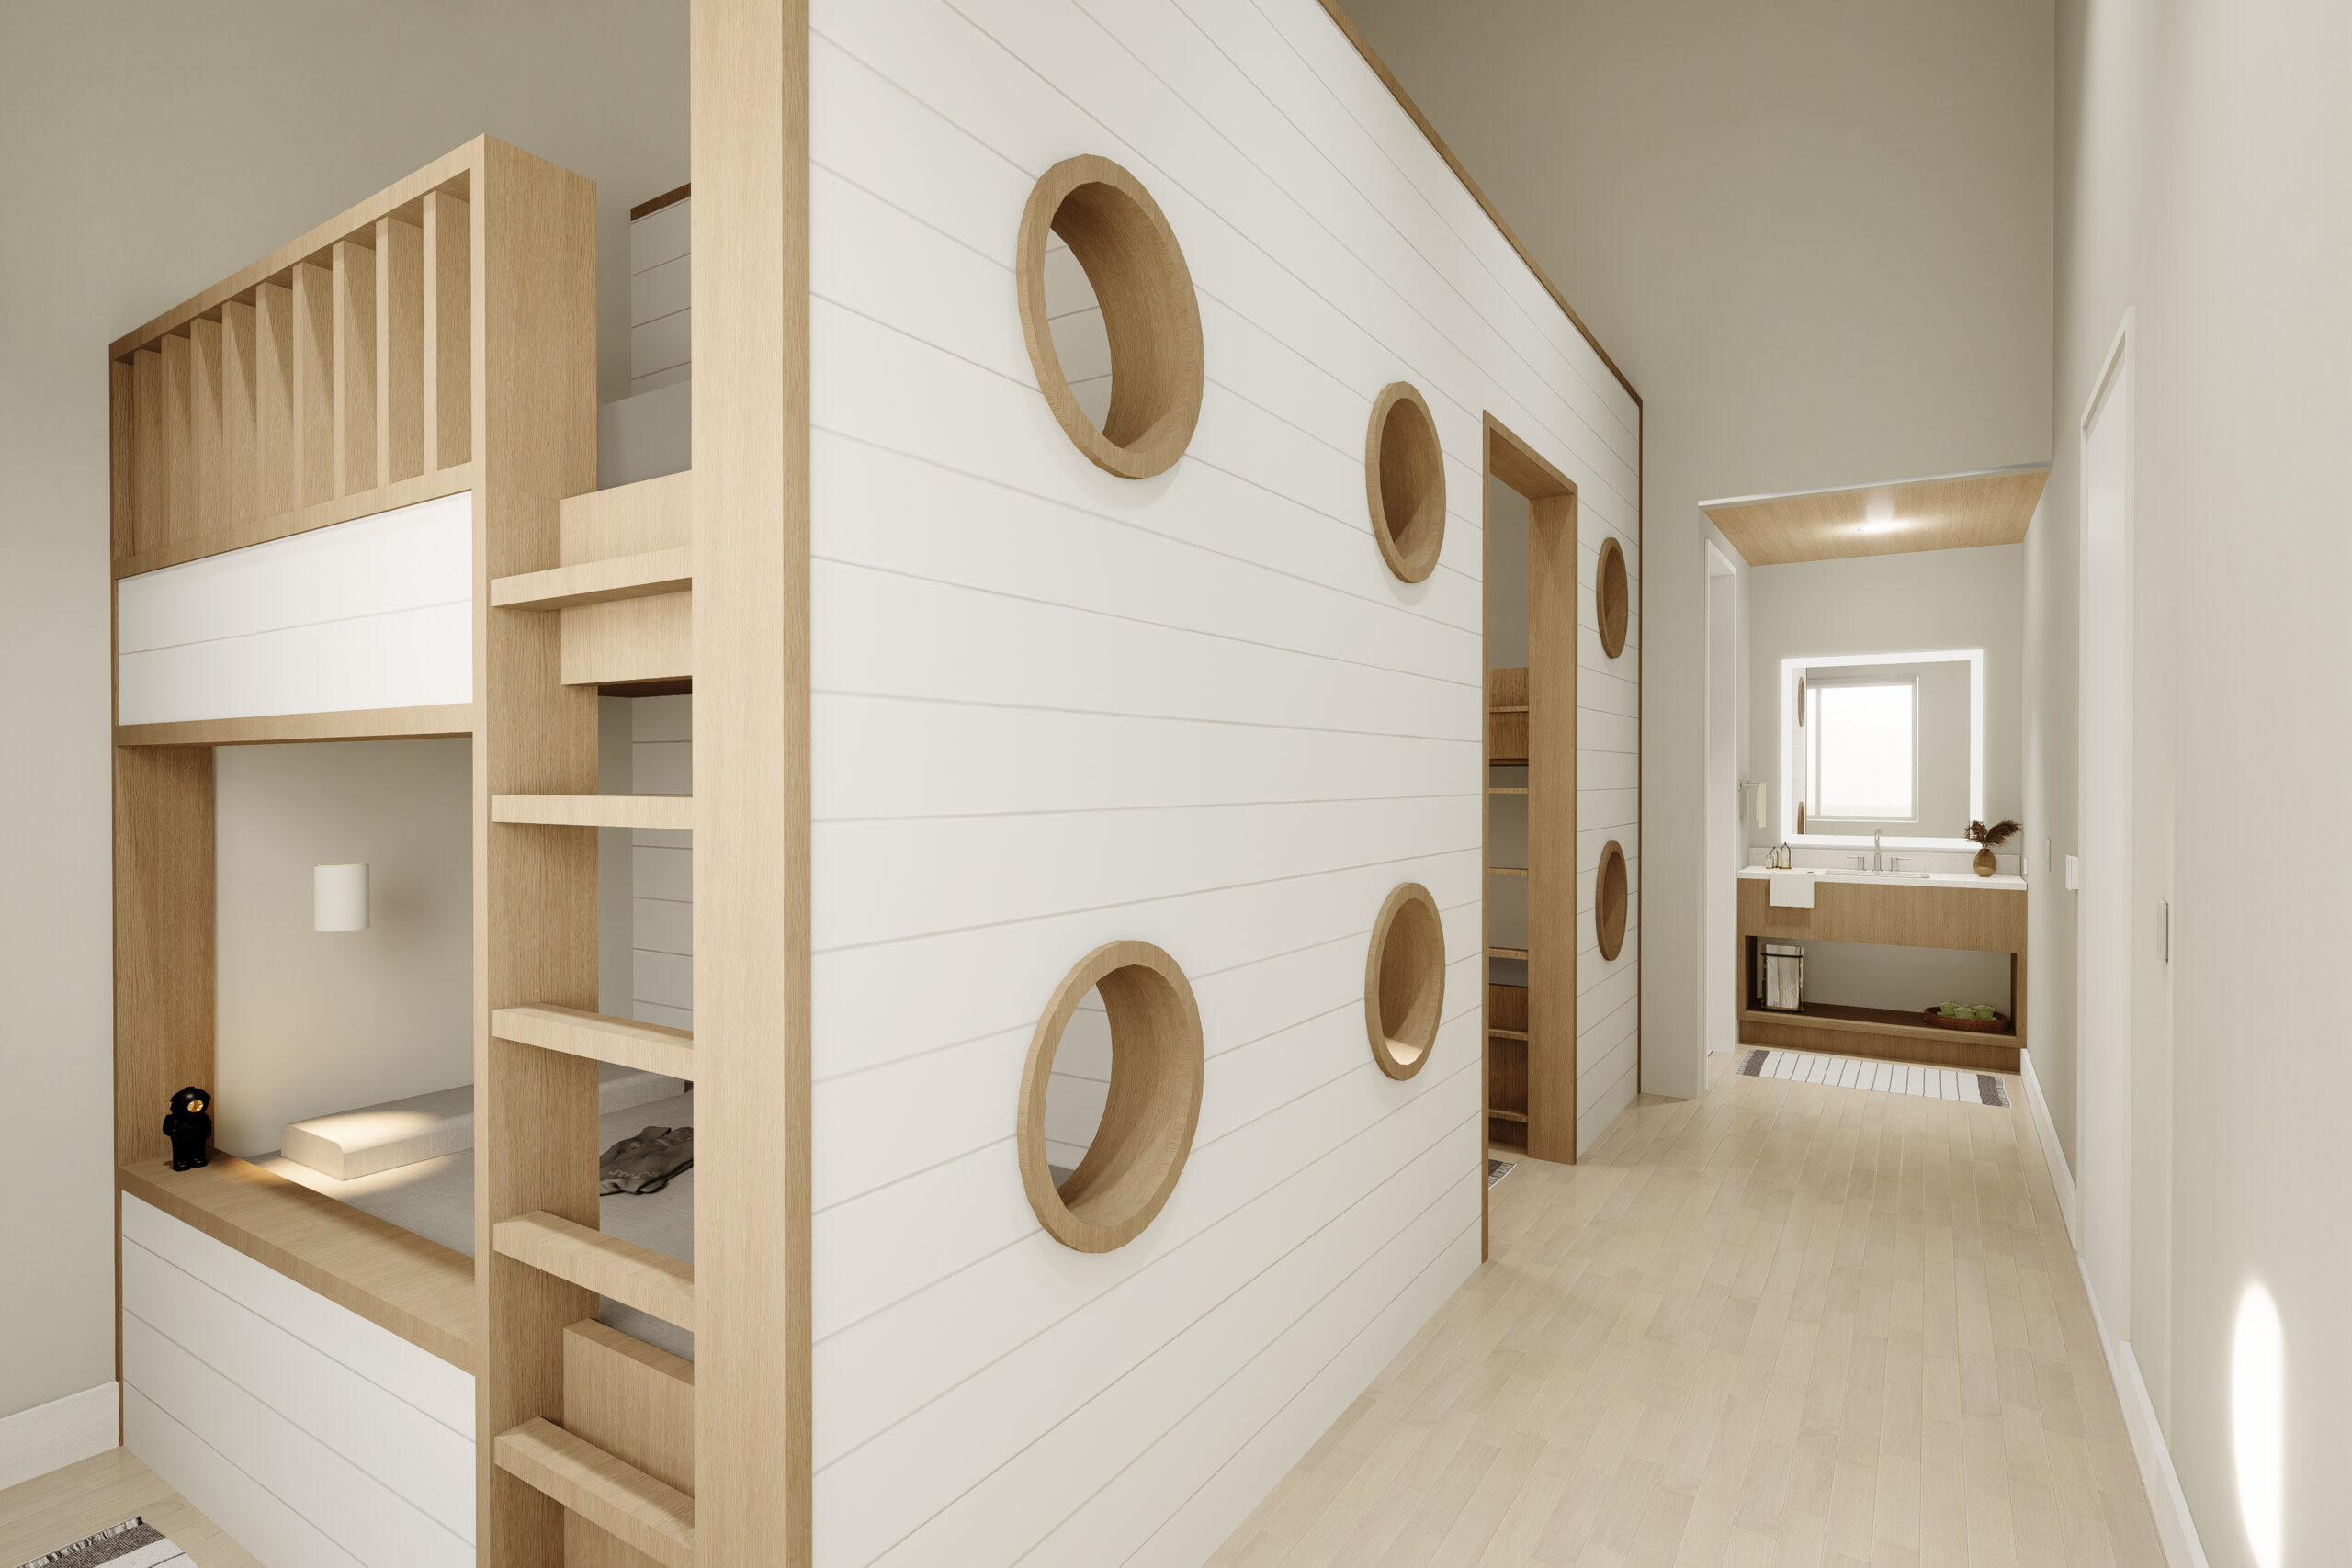 Rendering of a nautical-themed bunk room.